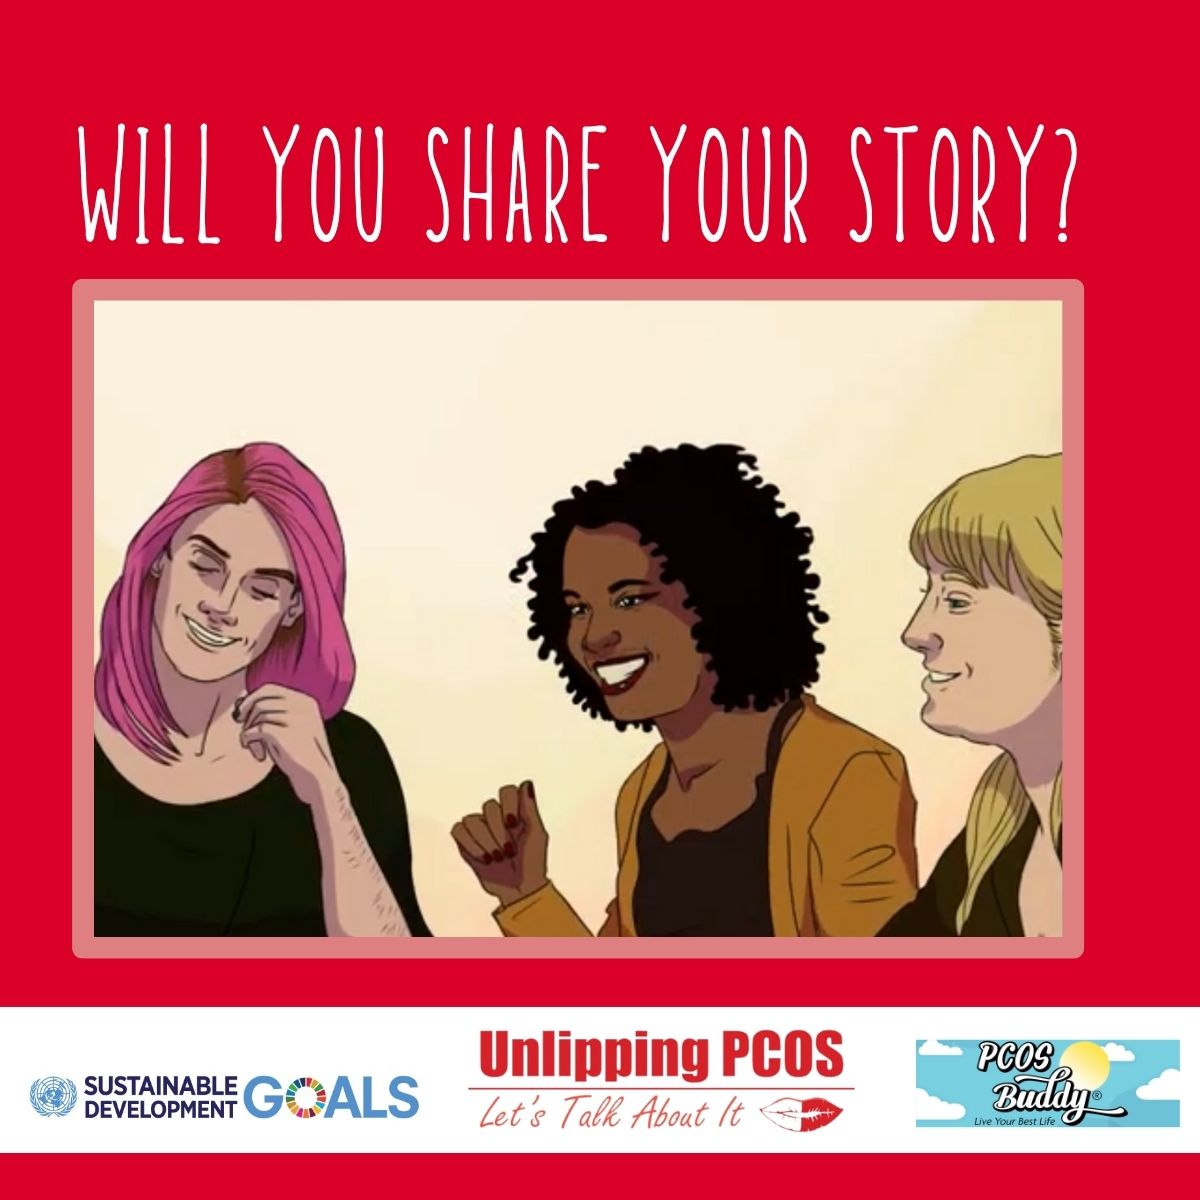 Do you have PCOS? Will you tell your story & help others? 
If so please drop us a PM, comment below or email hello@unlippingpcos.com, and don't worry, we can keep you anonymous if you prefer.

#globalcampaign #oneinten #tacklethetaboo #pcosadvice #PCOS #halflipselfiechallenge